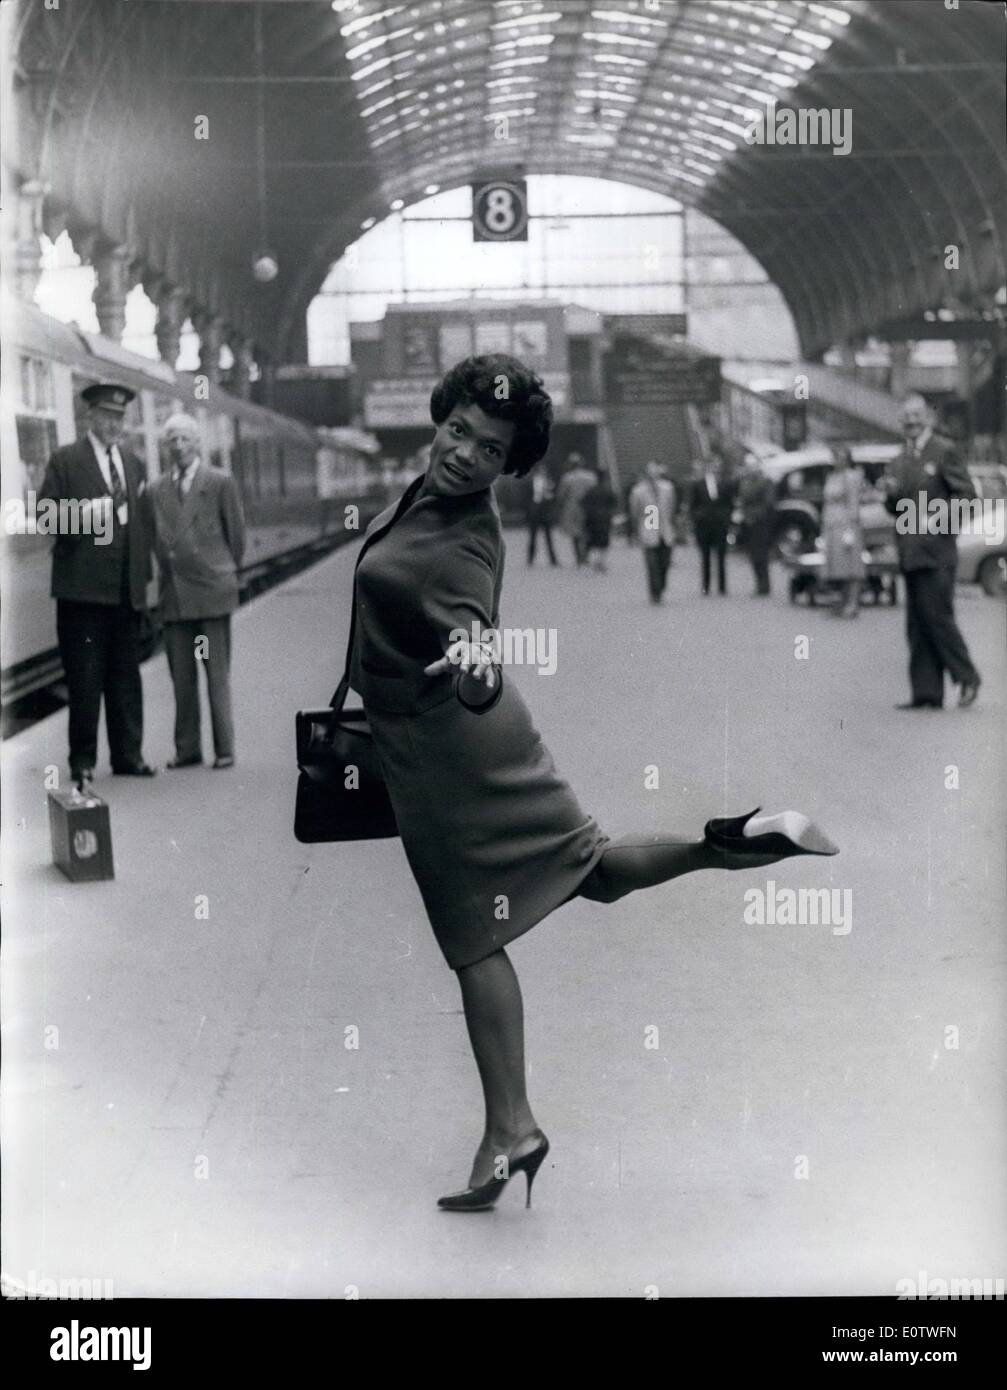 Aug. 08, 1960 - Eartha Kitt Arrives In London With Her Husband Of Three Months: Eartha Kitt, the singer whose purring notes bring out the gay dog in most men, arrived in London yesterday accompanied by her husband of three months Hollywood real-estate men Bill McDonald, Eartha, who is here for a two-months cabaret season, says she hopes to become an expectant mother while in London. Photo Shows Eartha Kitt is in high spirits when she arrived at Peddington Station yesterday. Stock Photo